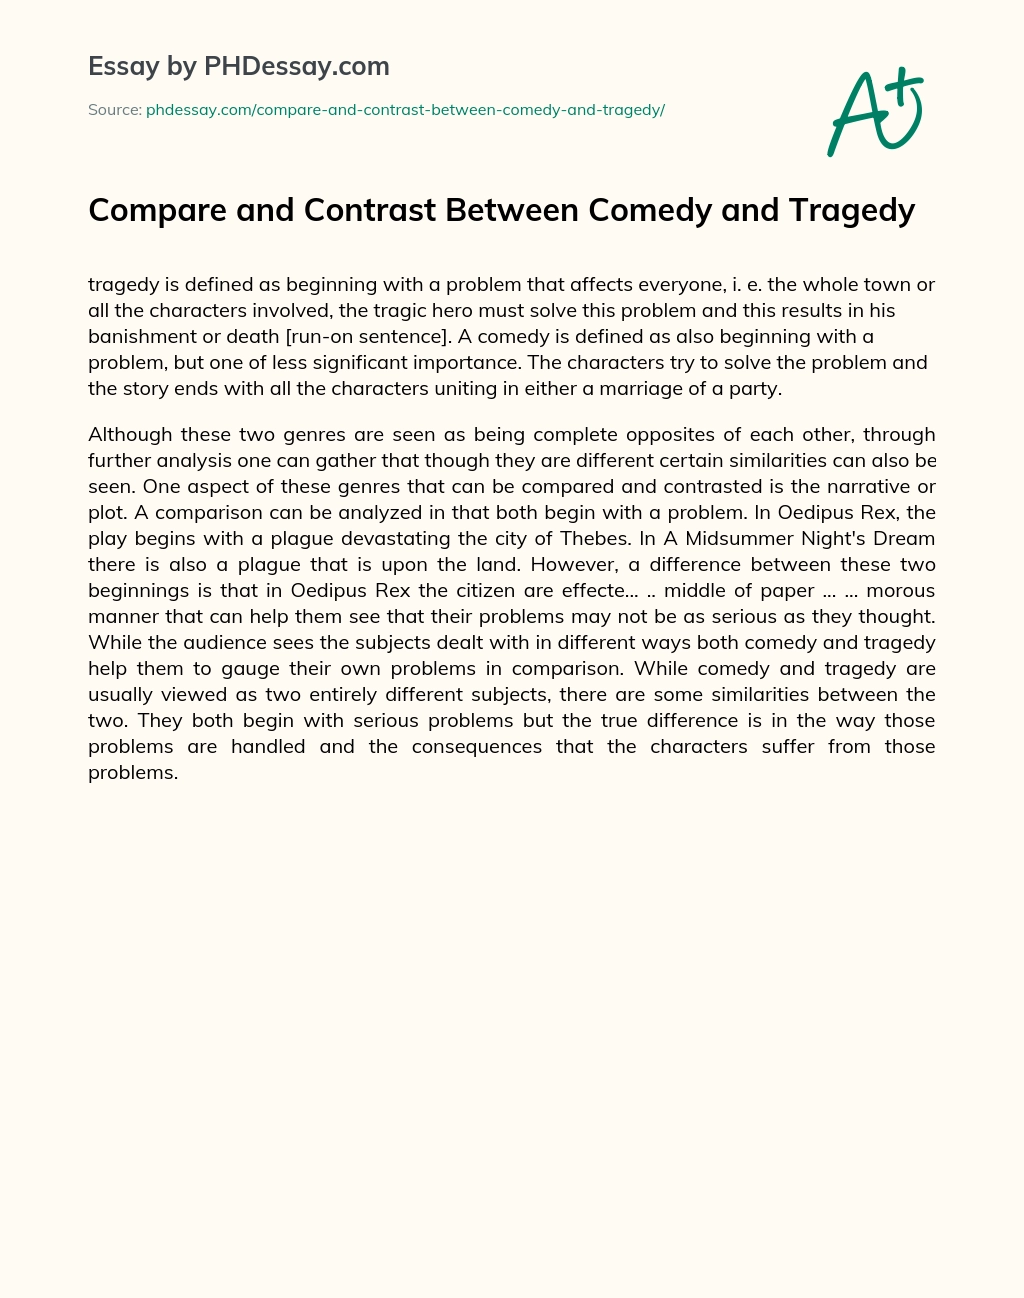 Compare and Contrast Between Comedy and Tragedy essay